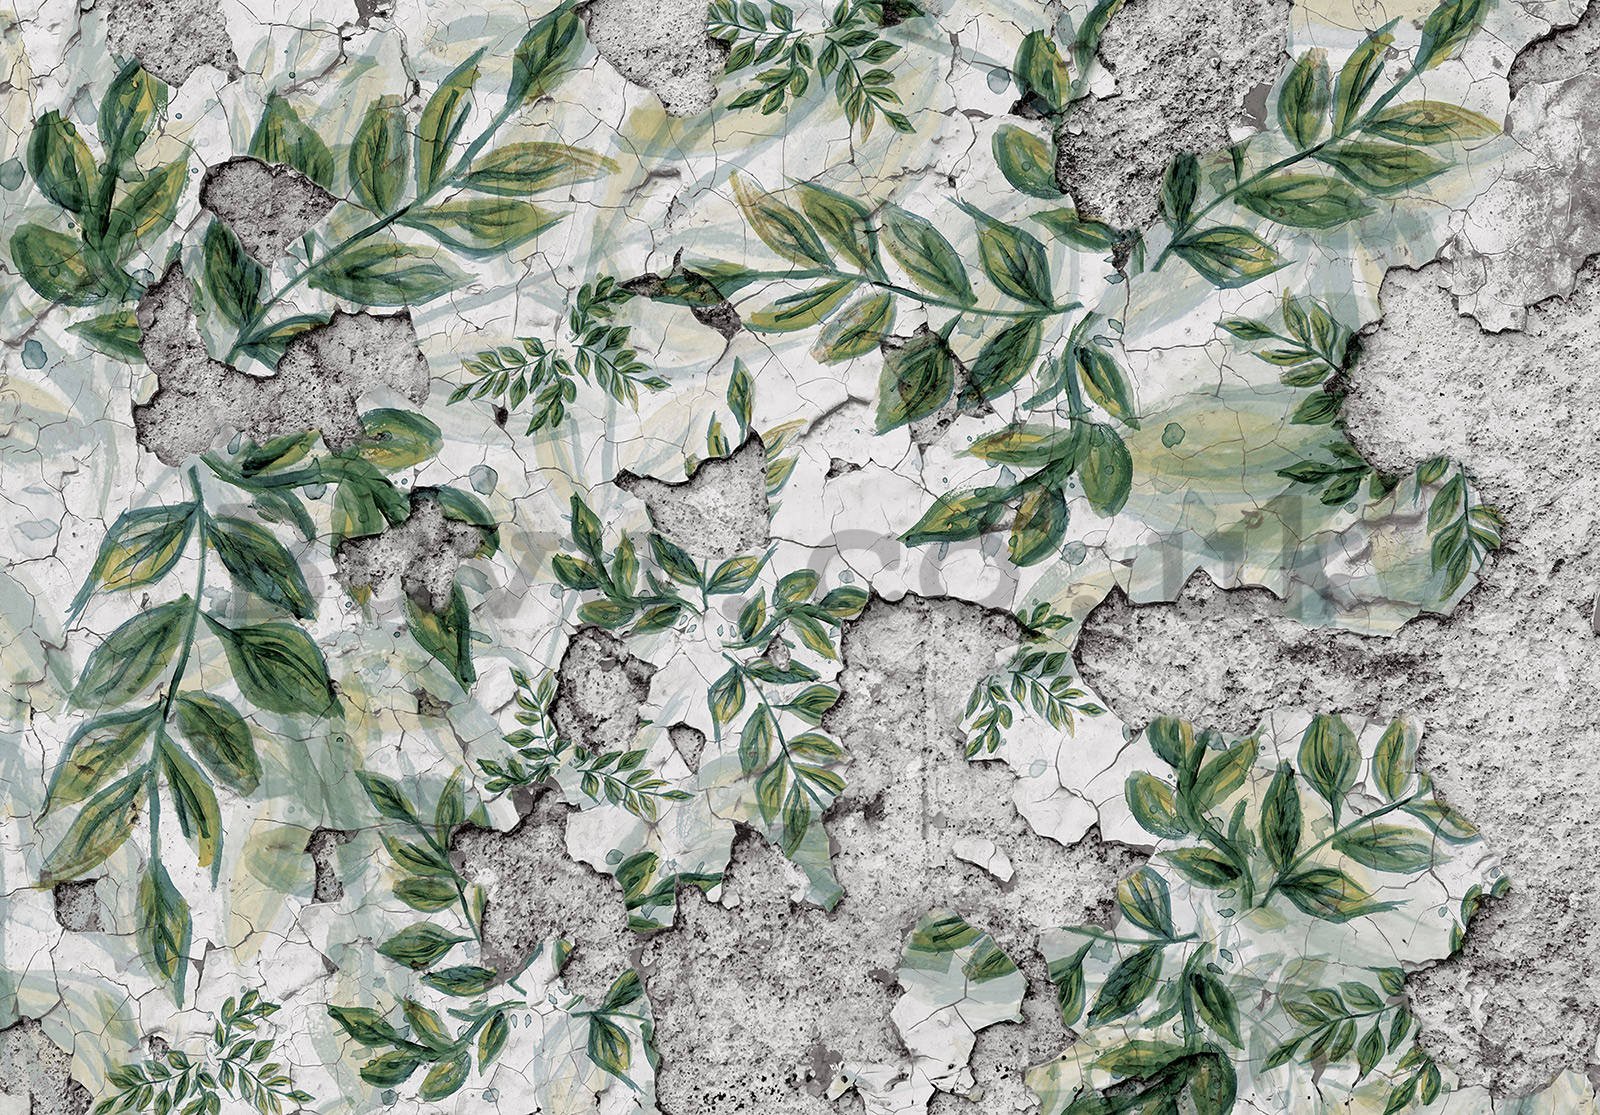 Wall mural vlies: Green leaves on cracked plaster - 368x254 cm